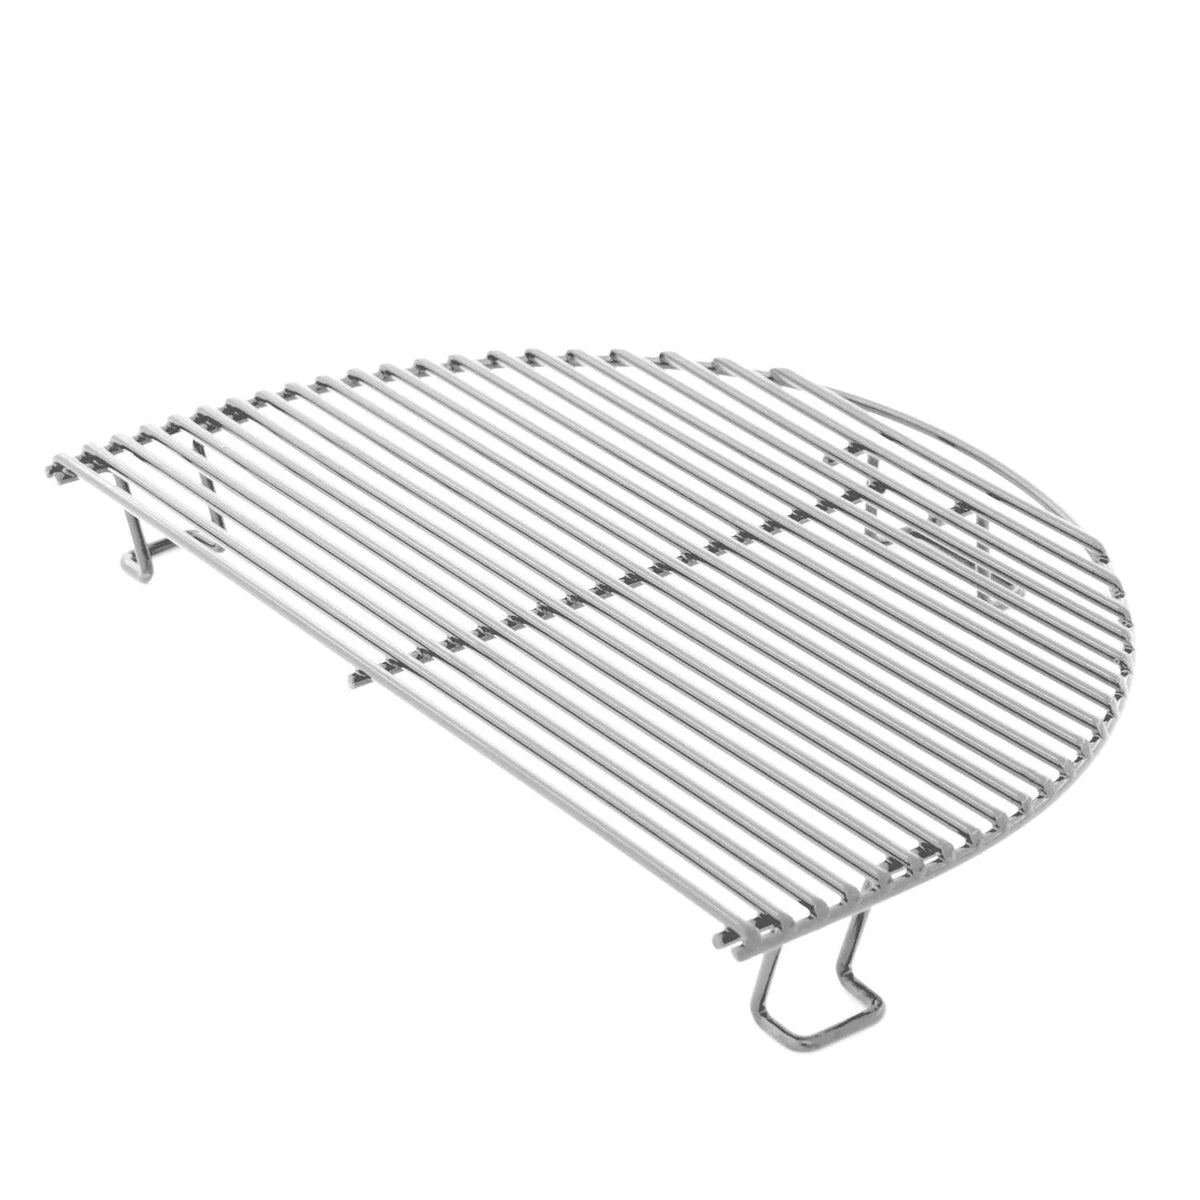 Primo PGCJRH Oval Junior 200 Ceramic Kamado Grill With Stainless Steel Grates - Stainless Steel Grate